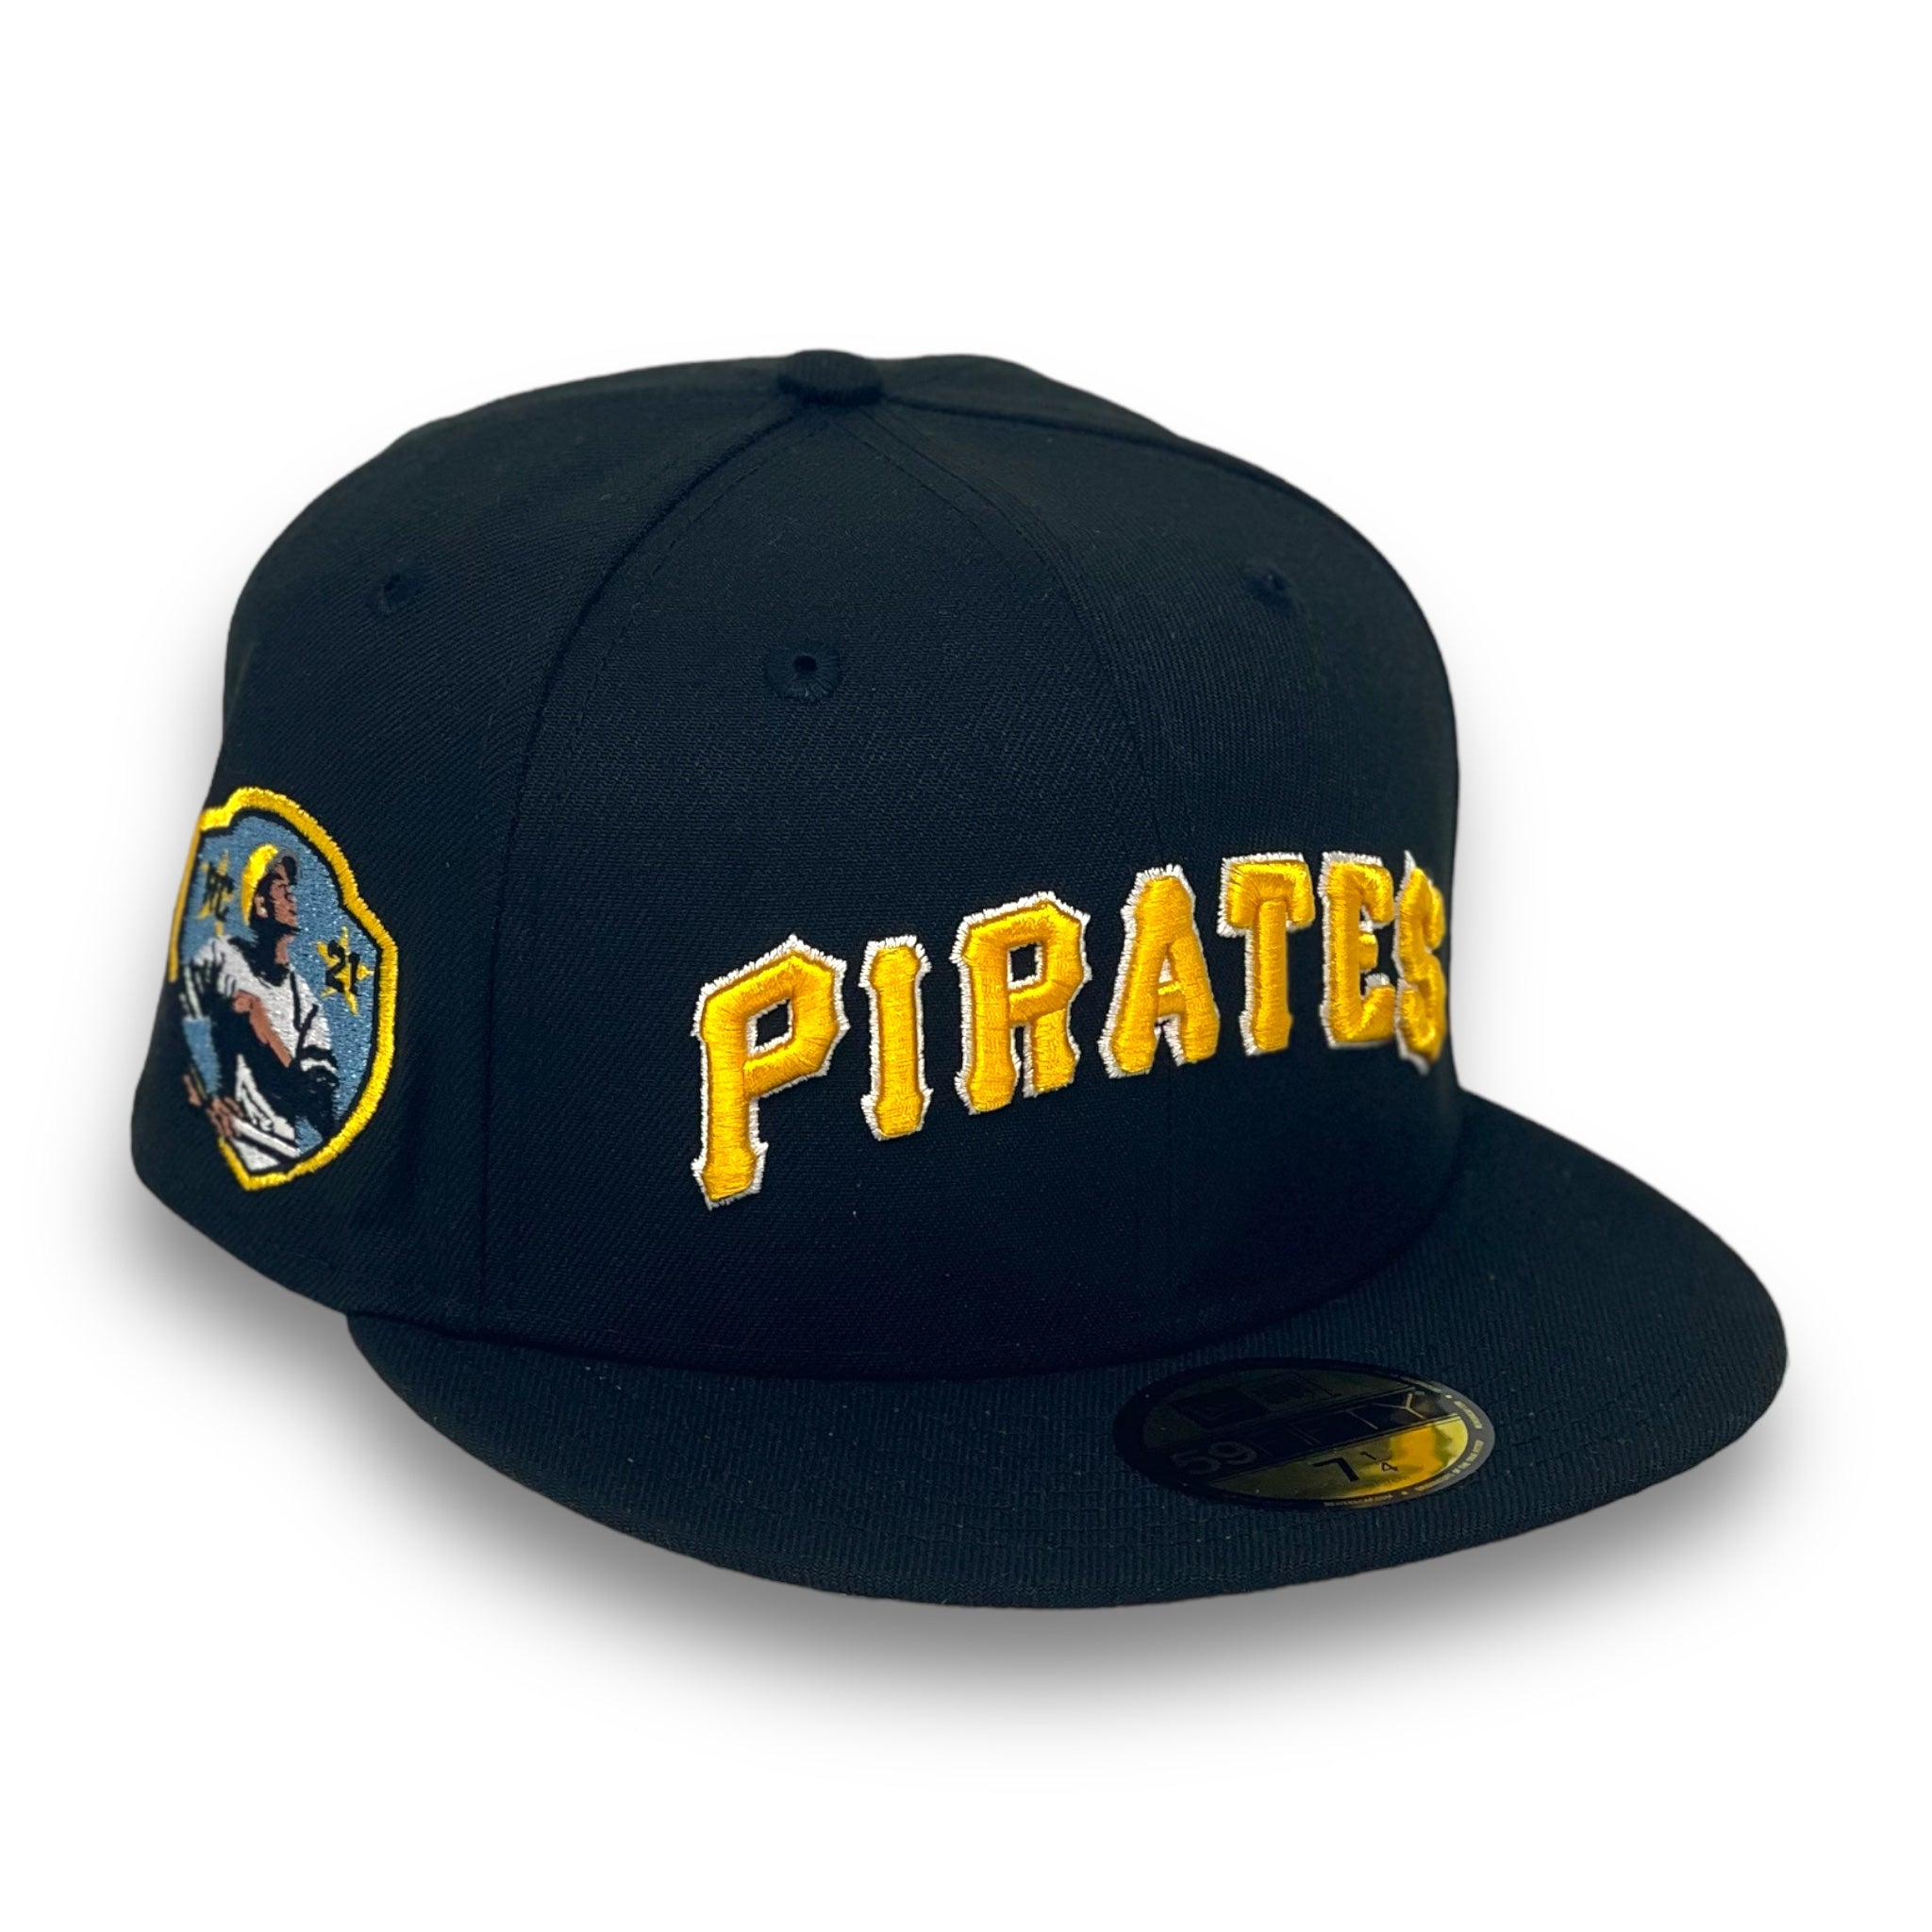 PITTSBURGH PIRATES (BLACK) (ROBERTO CLEMENTE) NEW ERA 59FIFTY FITTED